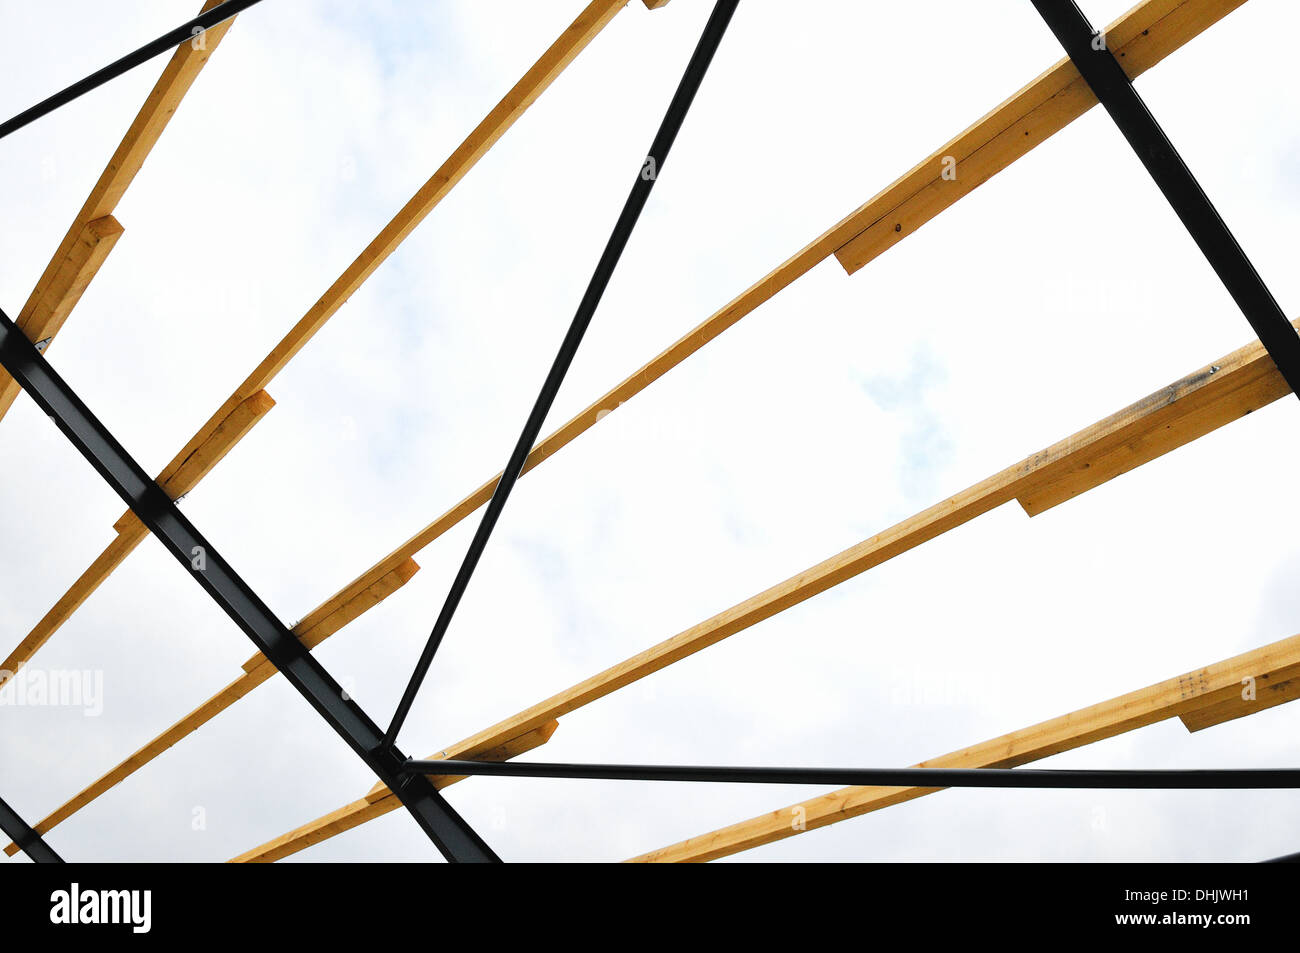 Steel and wooden roof construction Stock Photo